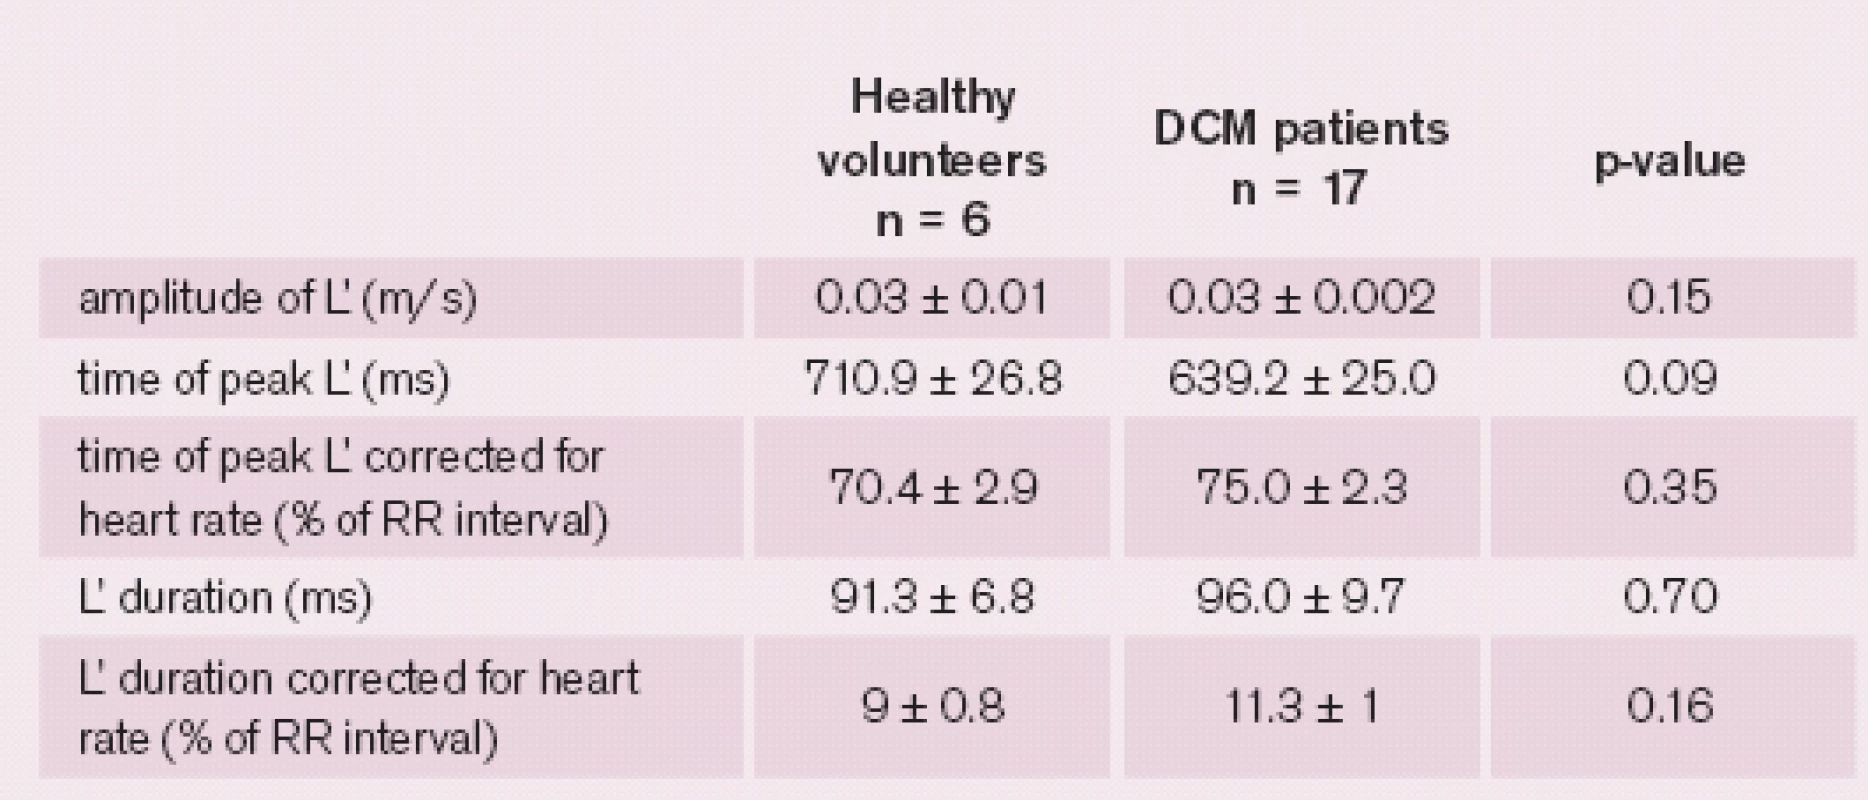 Characteristics of mid-diastolic mitral annular motion in healthy volunteers and in DCM patients with all heart rates. Values presented as mean ± standard error of the mean.